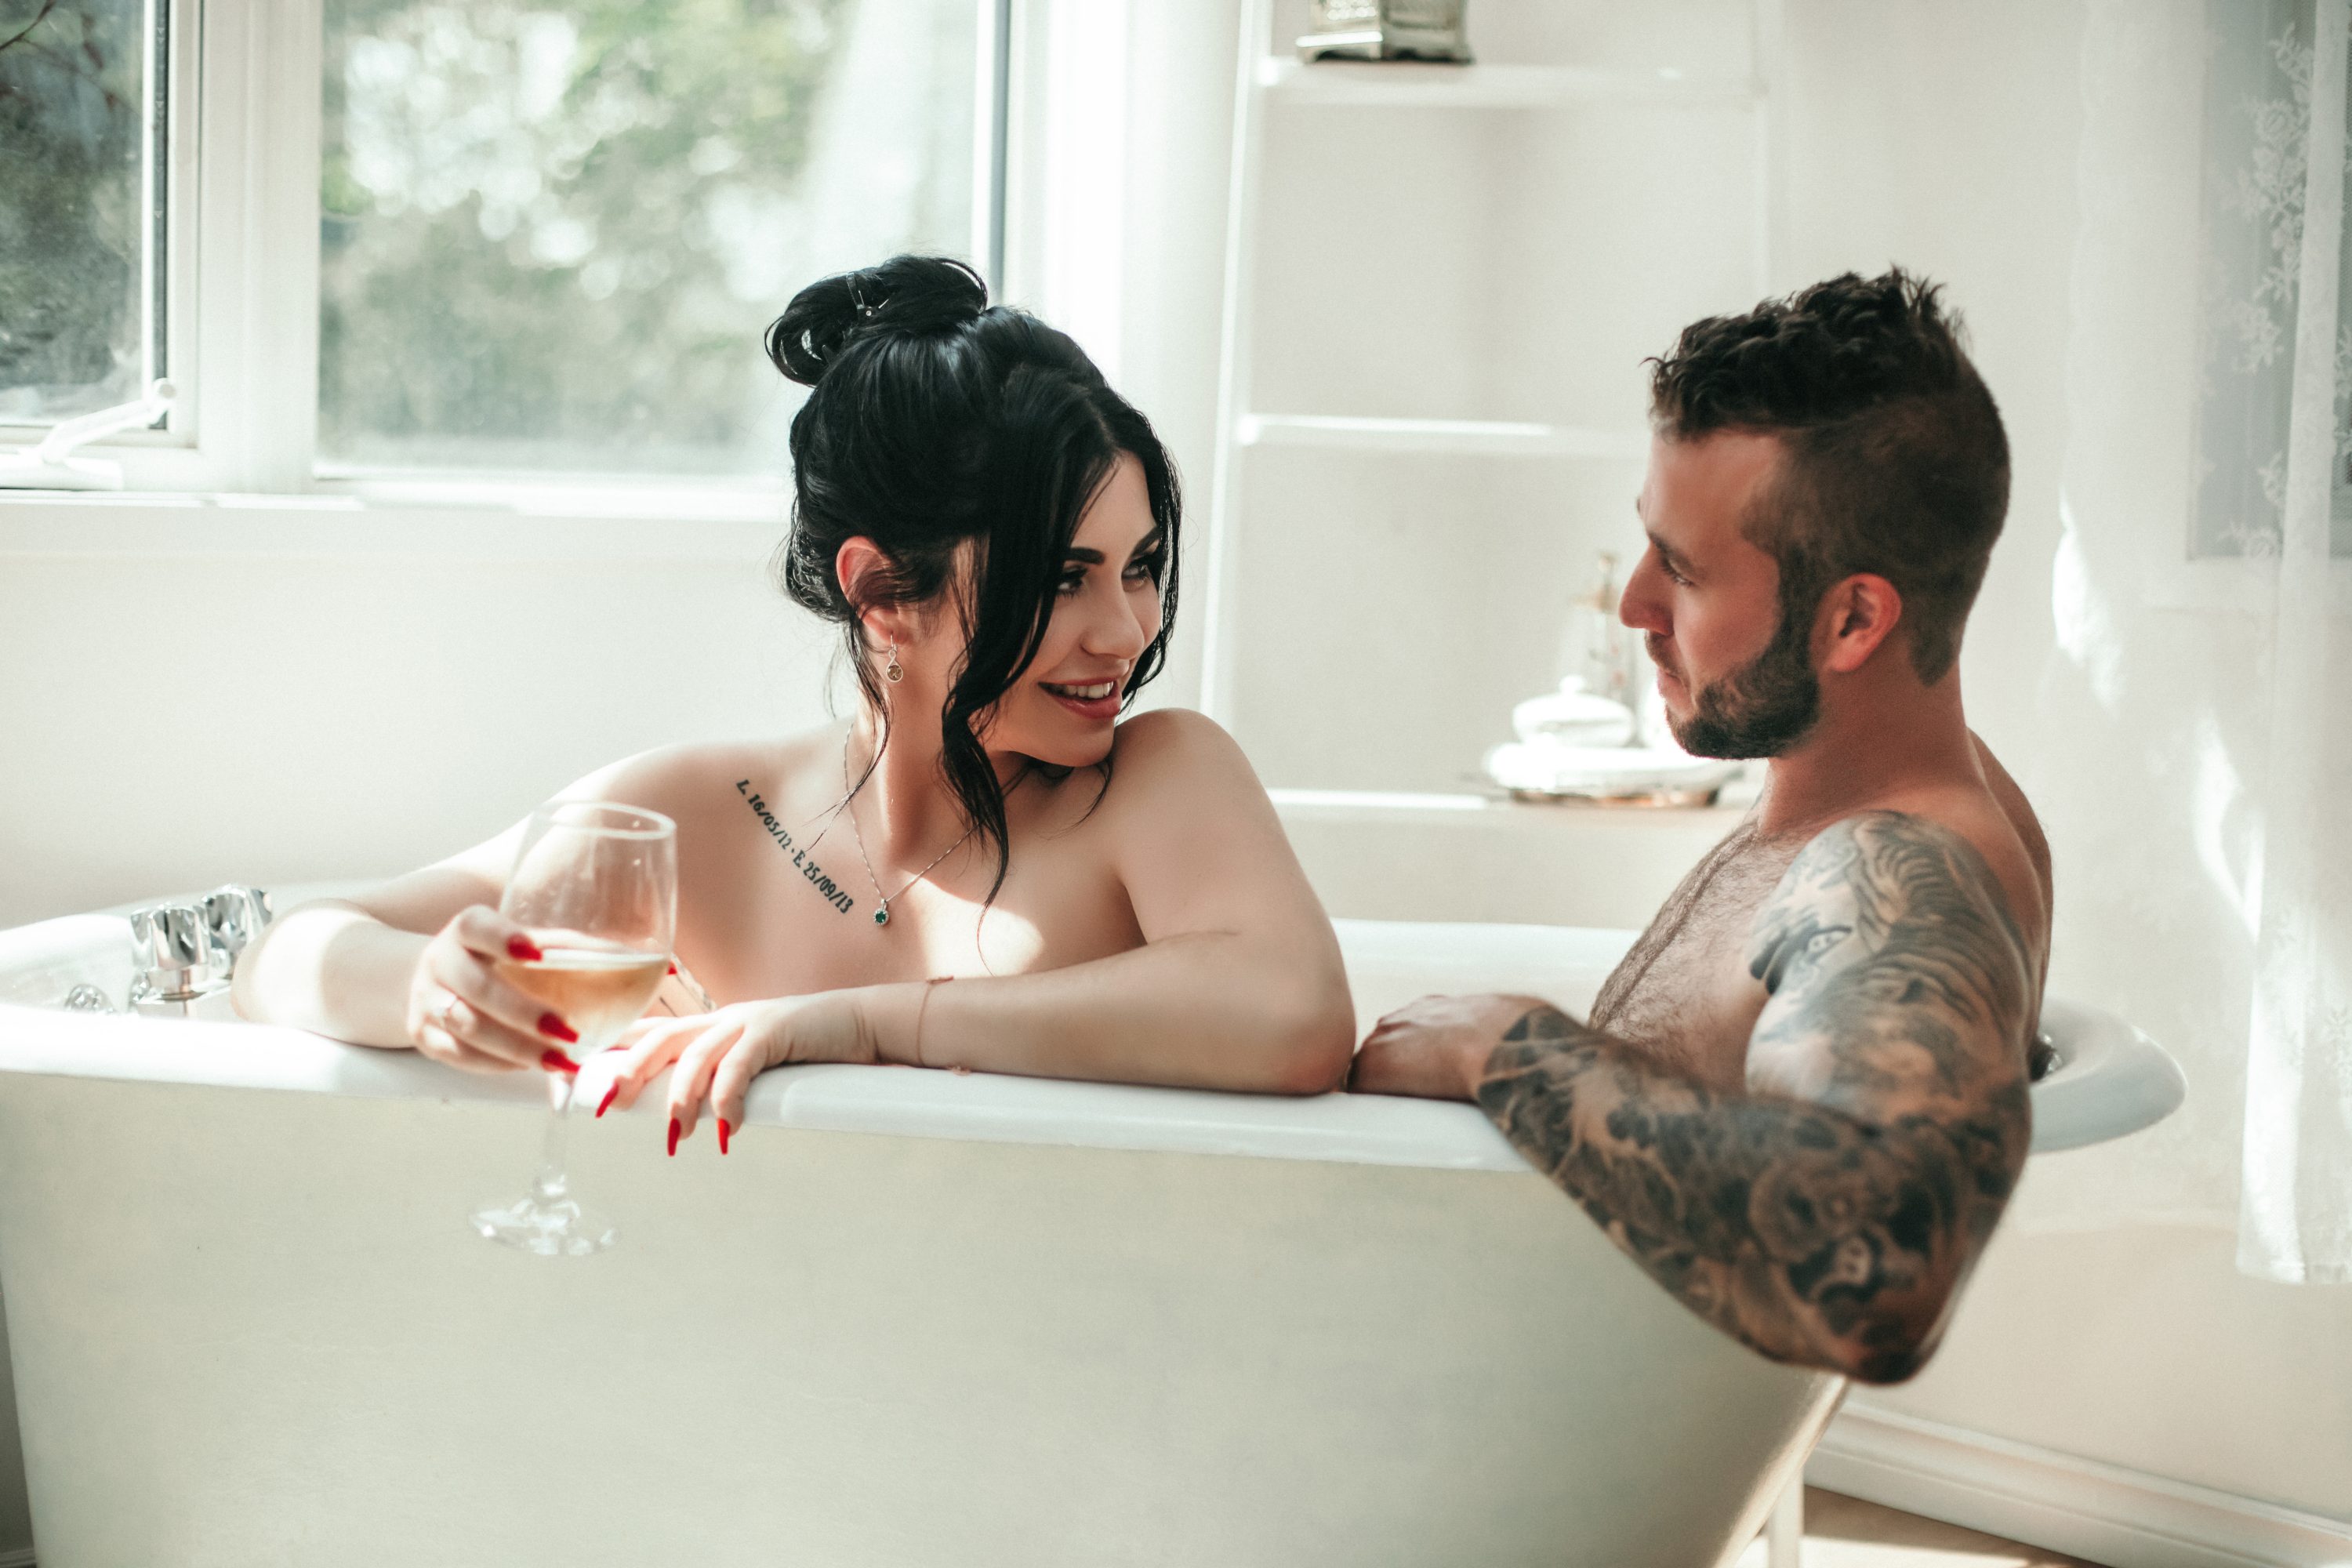 Want to do a couple boudoir session but having a hard time getting him to want to participate? Check out our top 6 FUN ways to get him on board. | couples boudoir | boudoir shoot | boudoir tips | intimate photoshoot